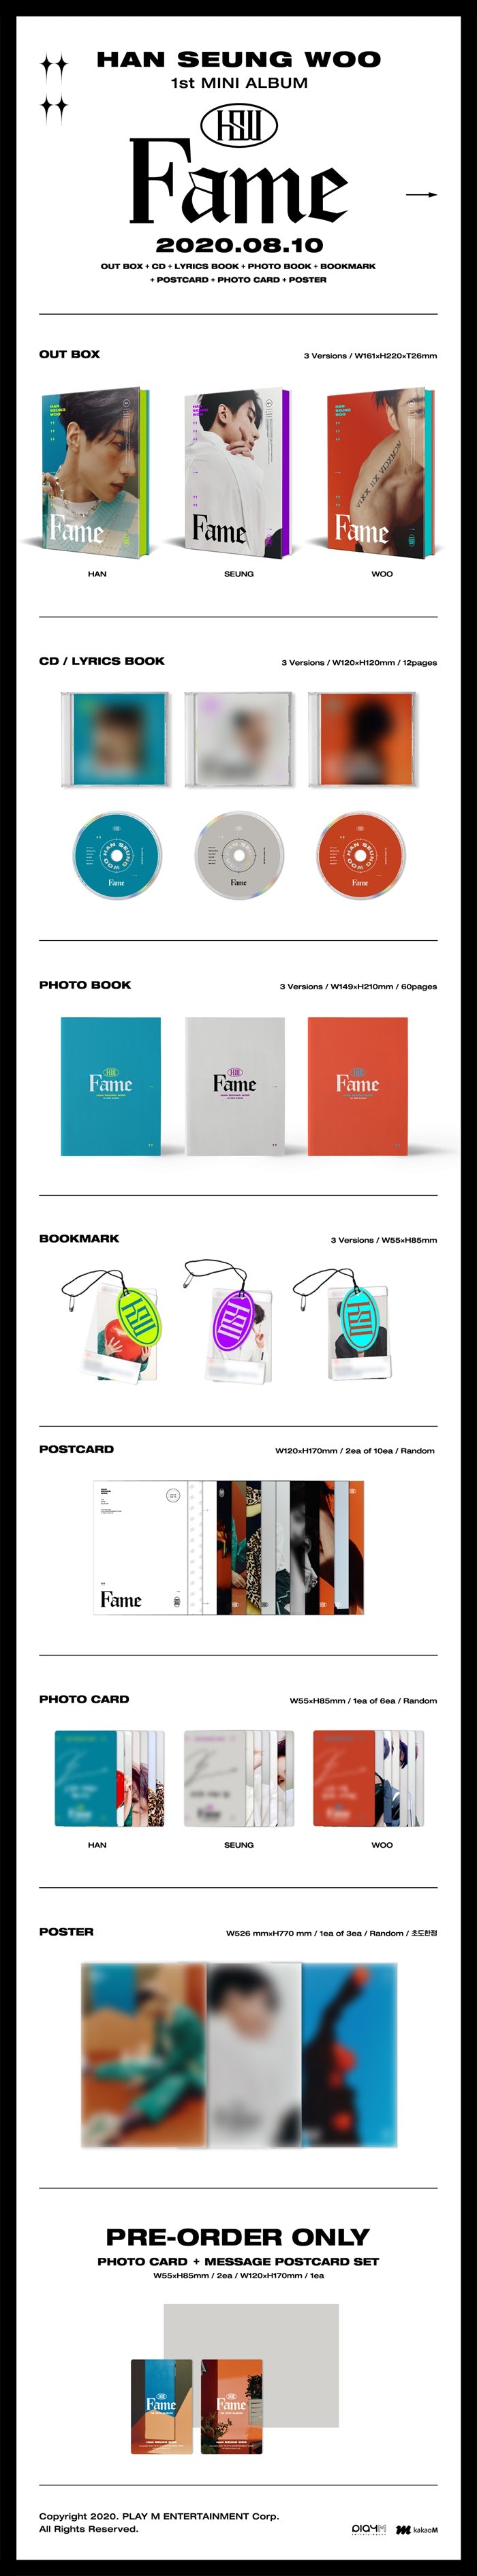 1 CD
1 Photo Book (60 pages)
1 Lyrics Book (12 pages)
1 Bookmark
2 Postcards
1 Photo Card